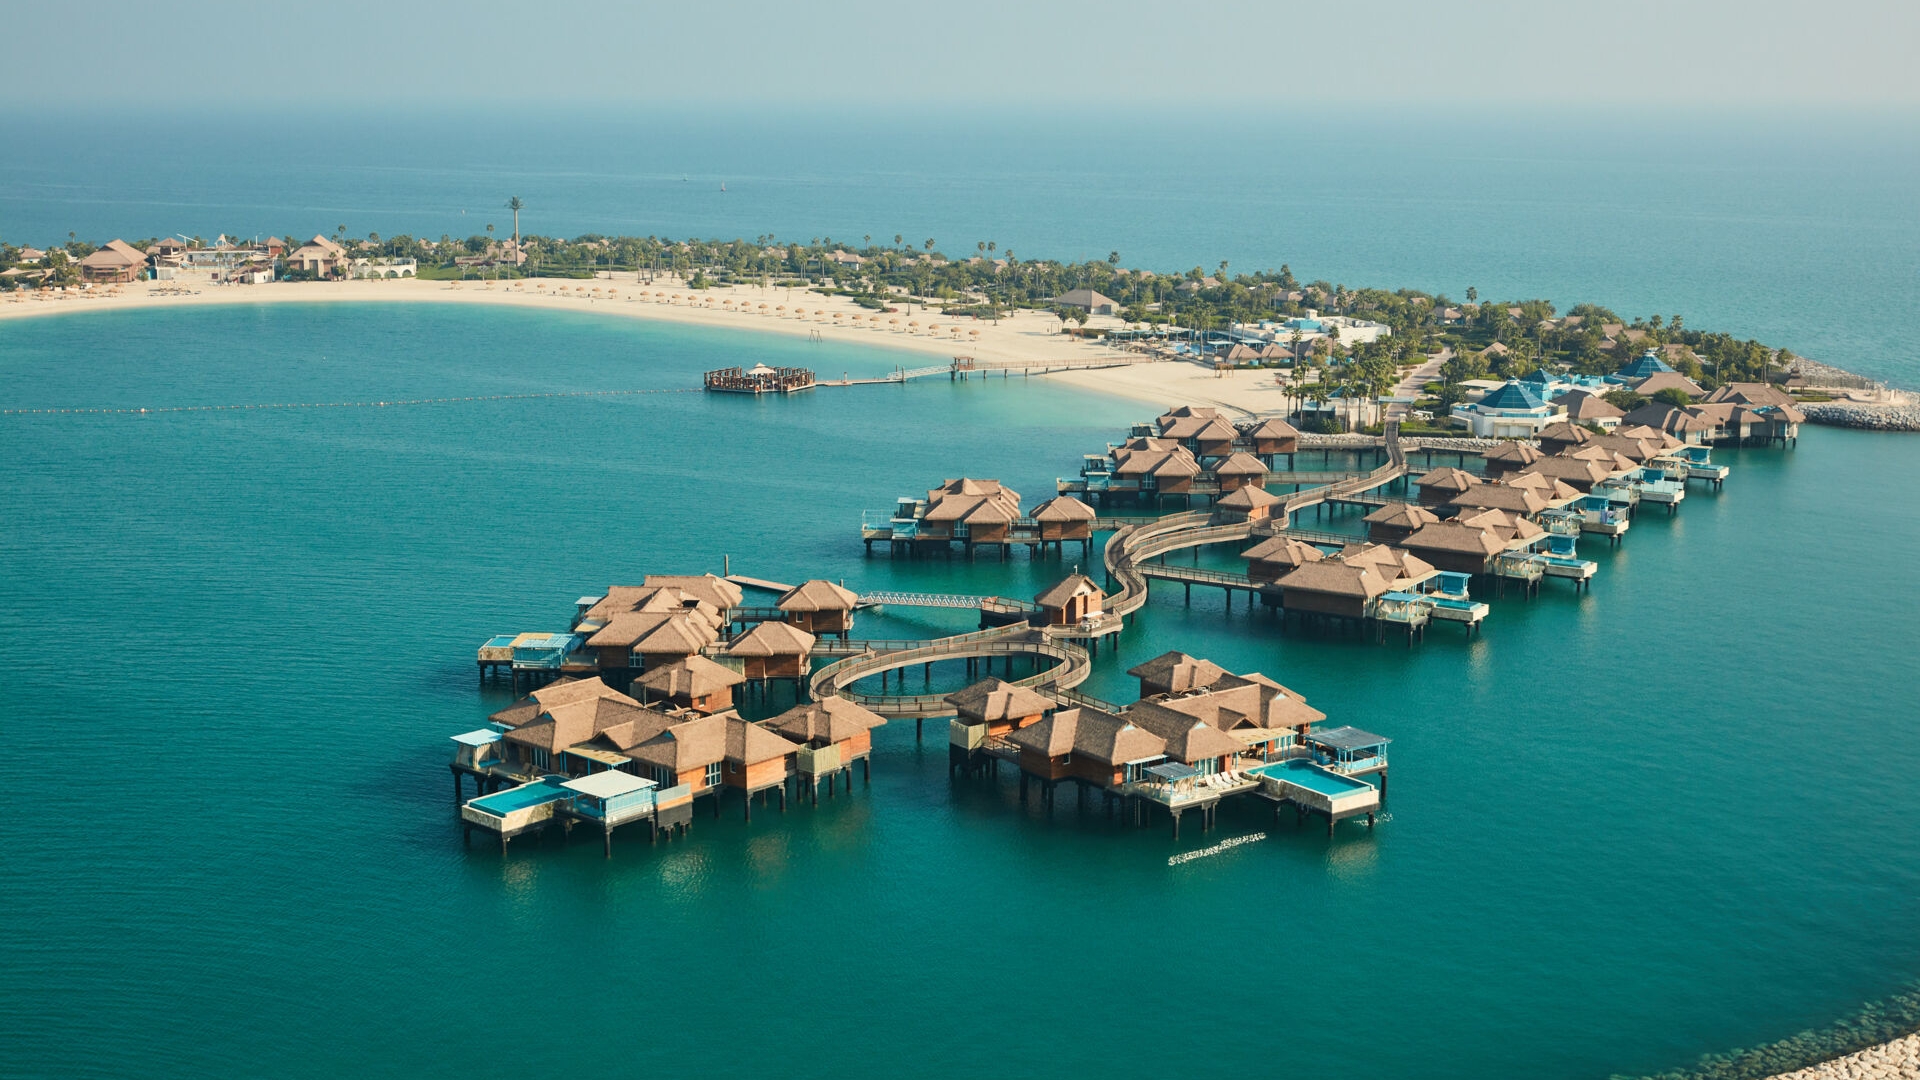 The Maldives-style overwater villas that are cheaper and a short flight away